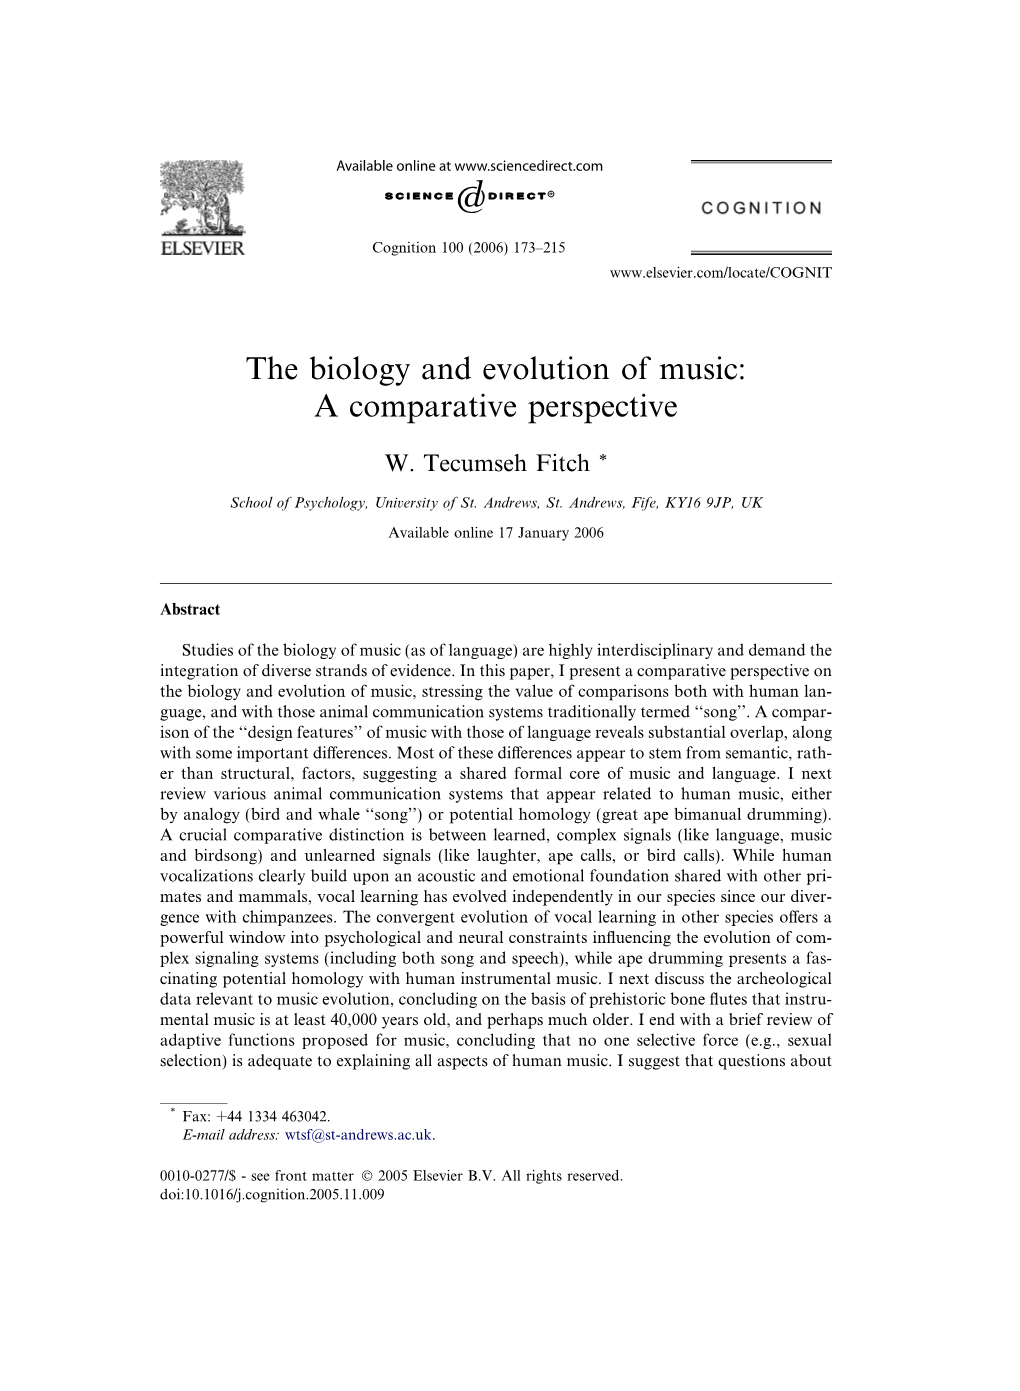 The Biology and Evolution of Music: a Comparative Perspective